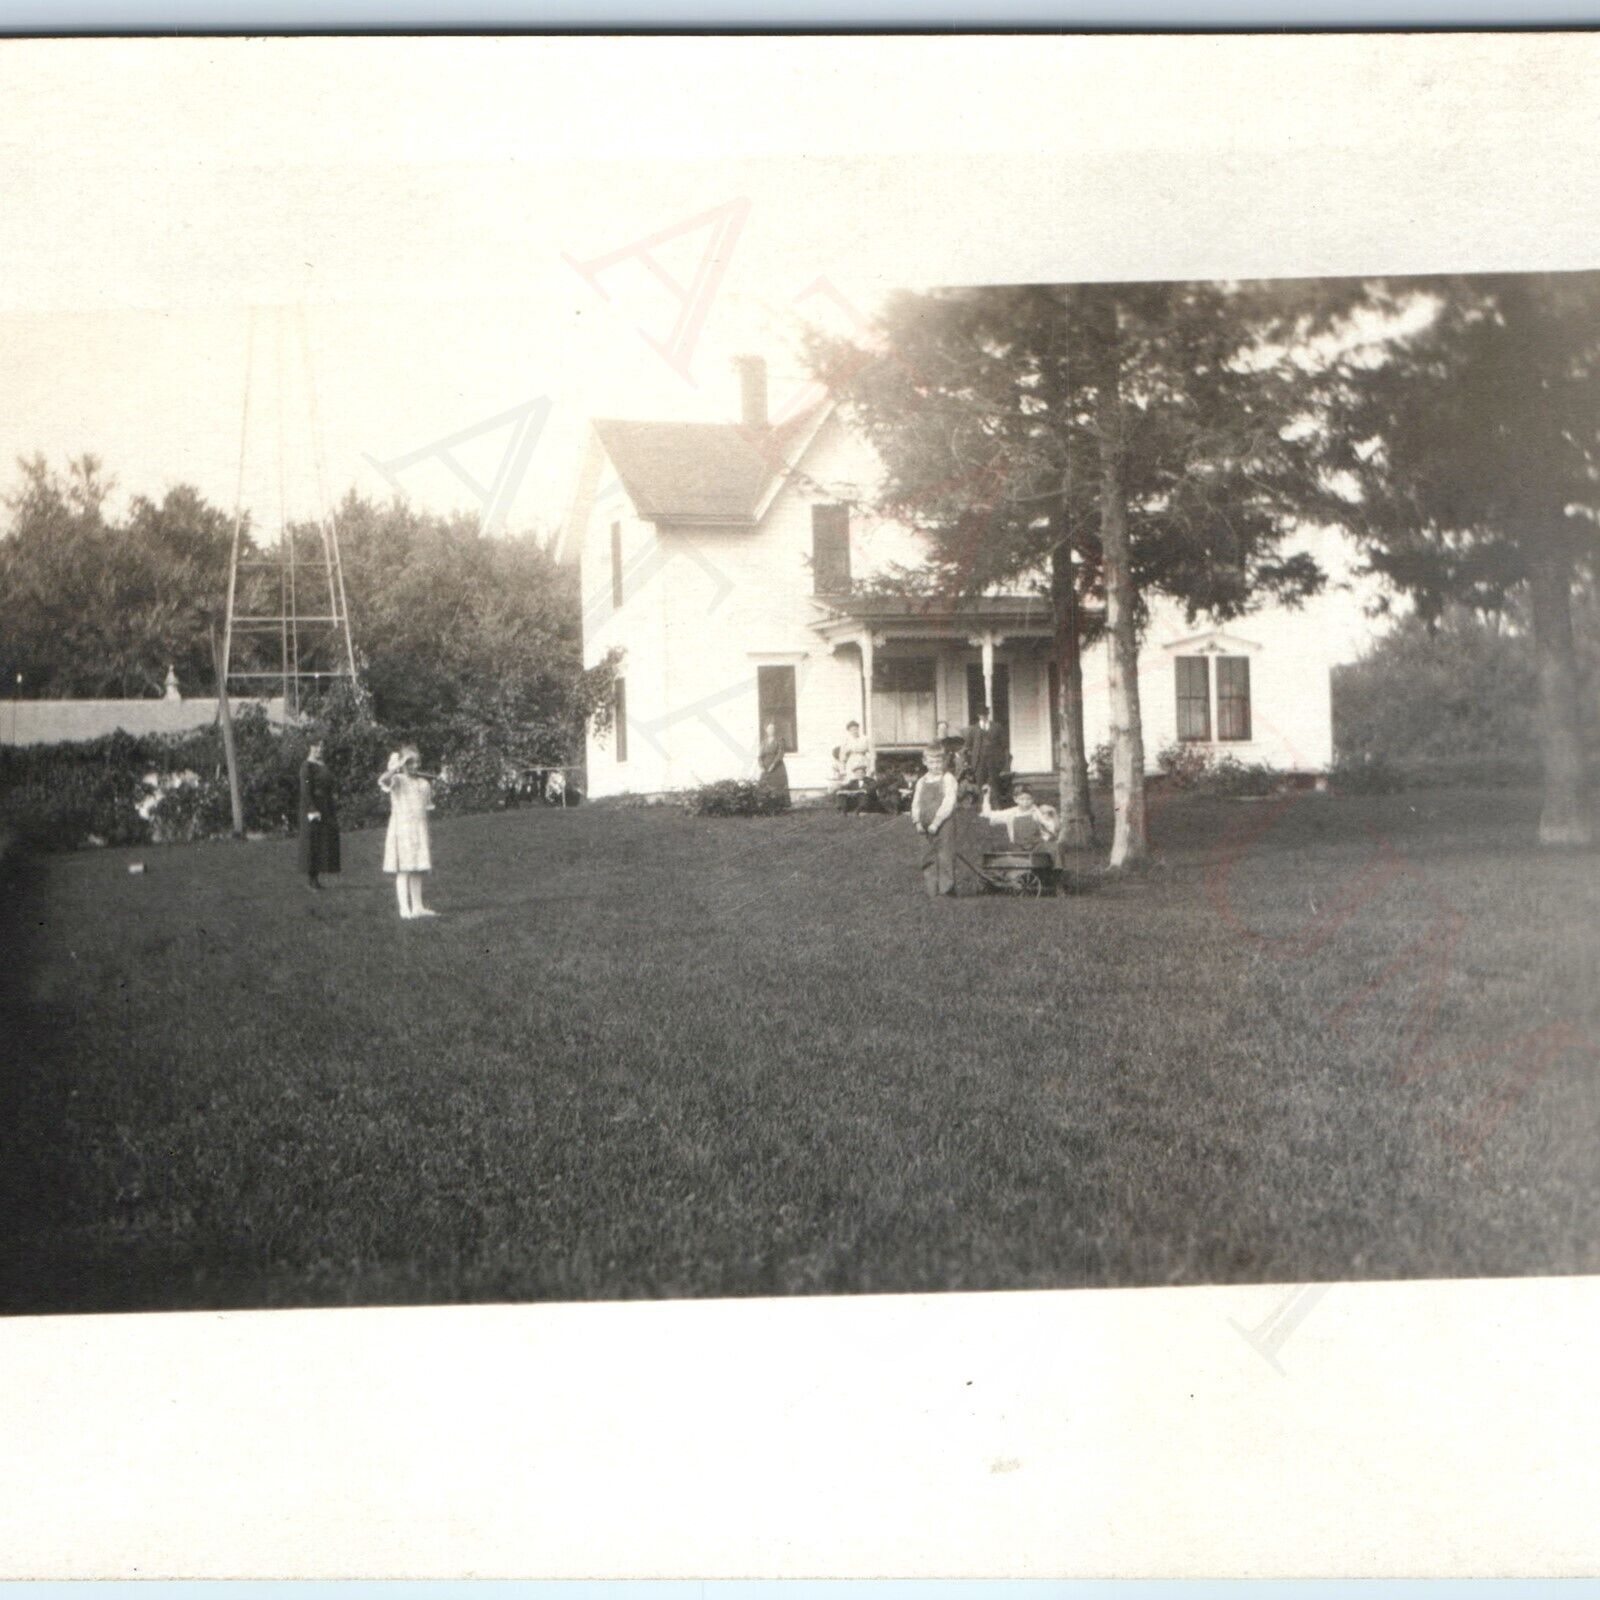 c1910s Lovely House Outdoor Lawn Family Gather RPPC Boys Girls Play Wagon A192